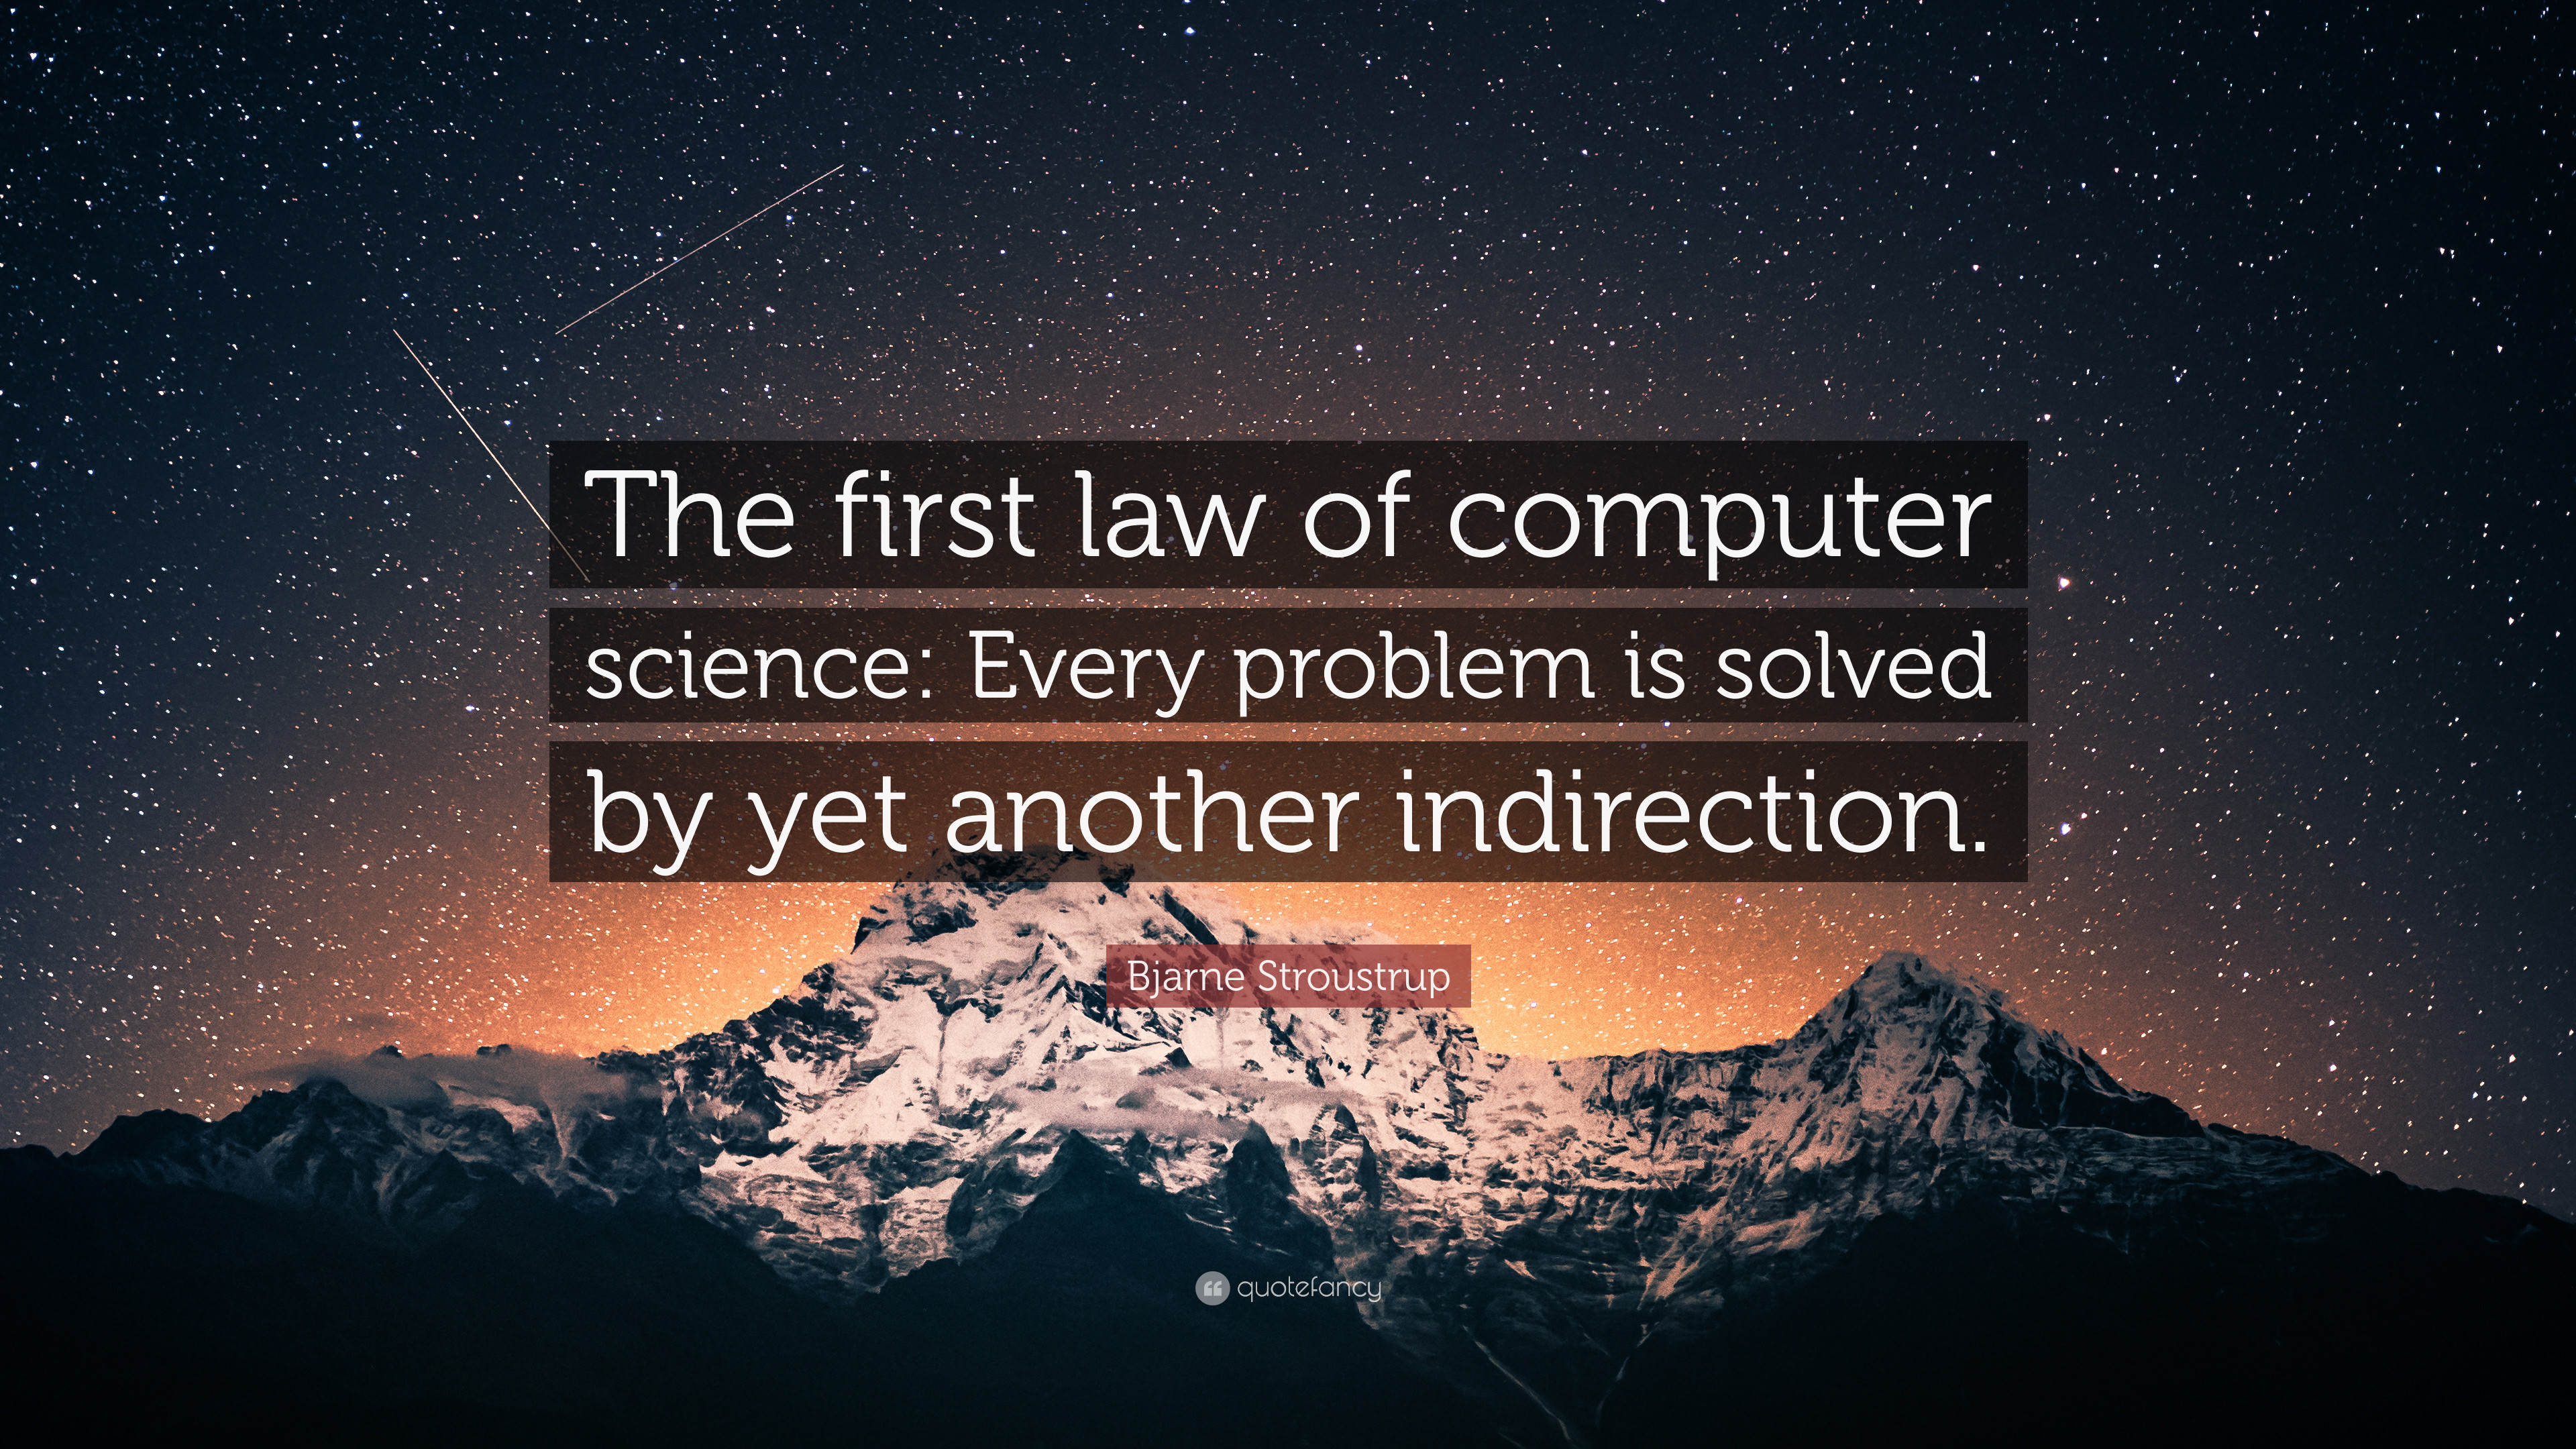 3840x2160 Bjarne Stroustrup Quote: “The first law of computer science: Every problem  is solved